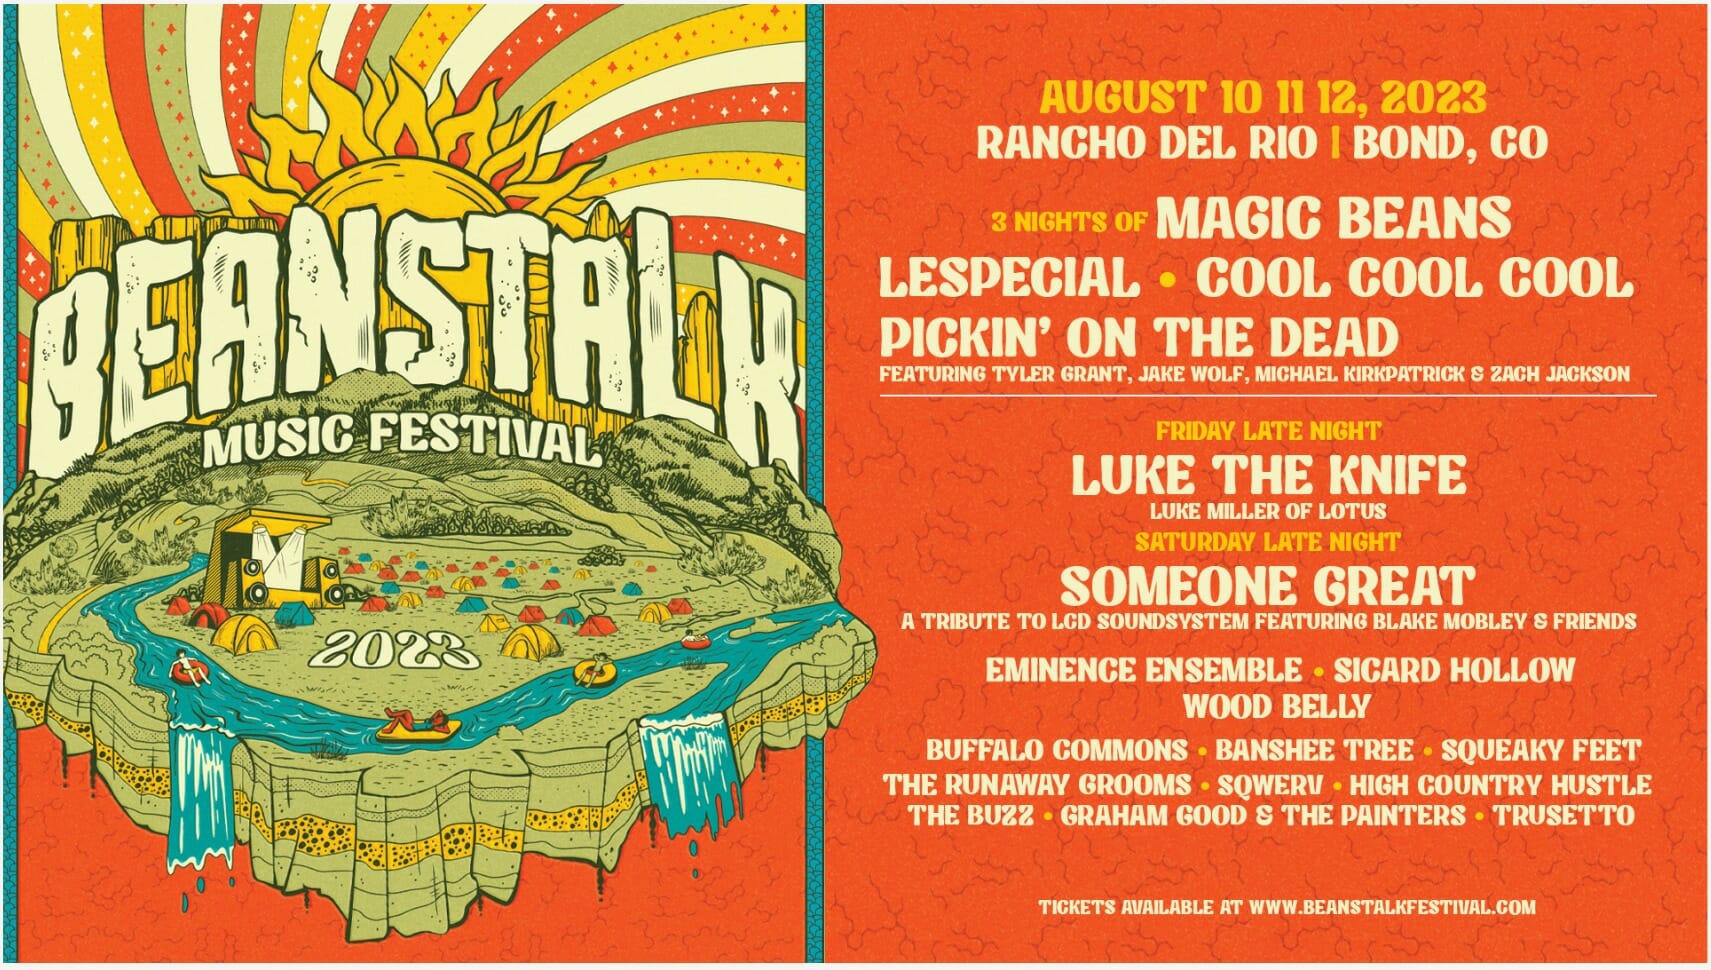 Beanstalk Music Festival Shares 2023 Artist Lineup: Magic Beans, lespecial, Cool Cool Cool and More